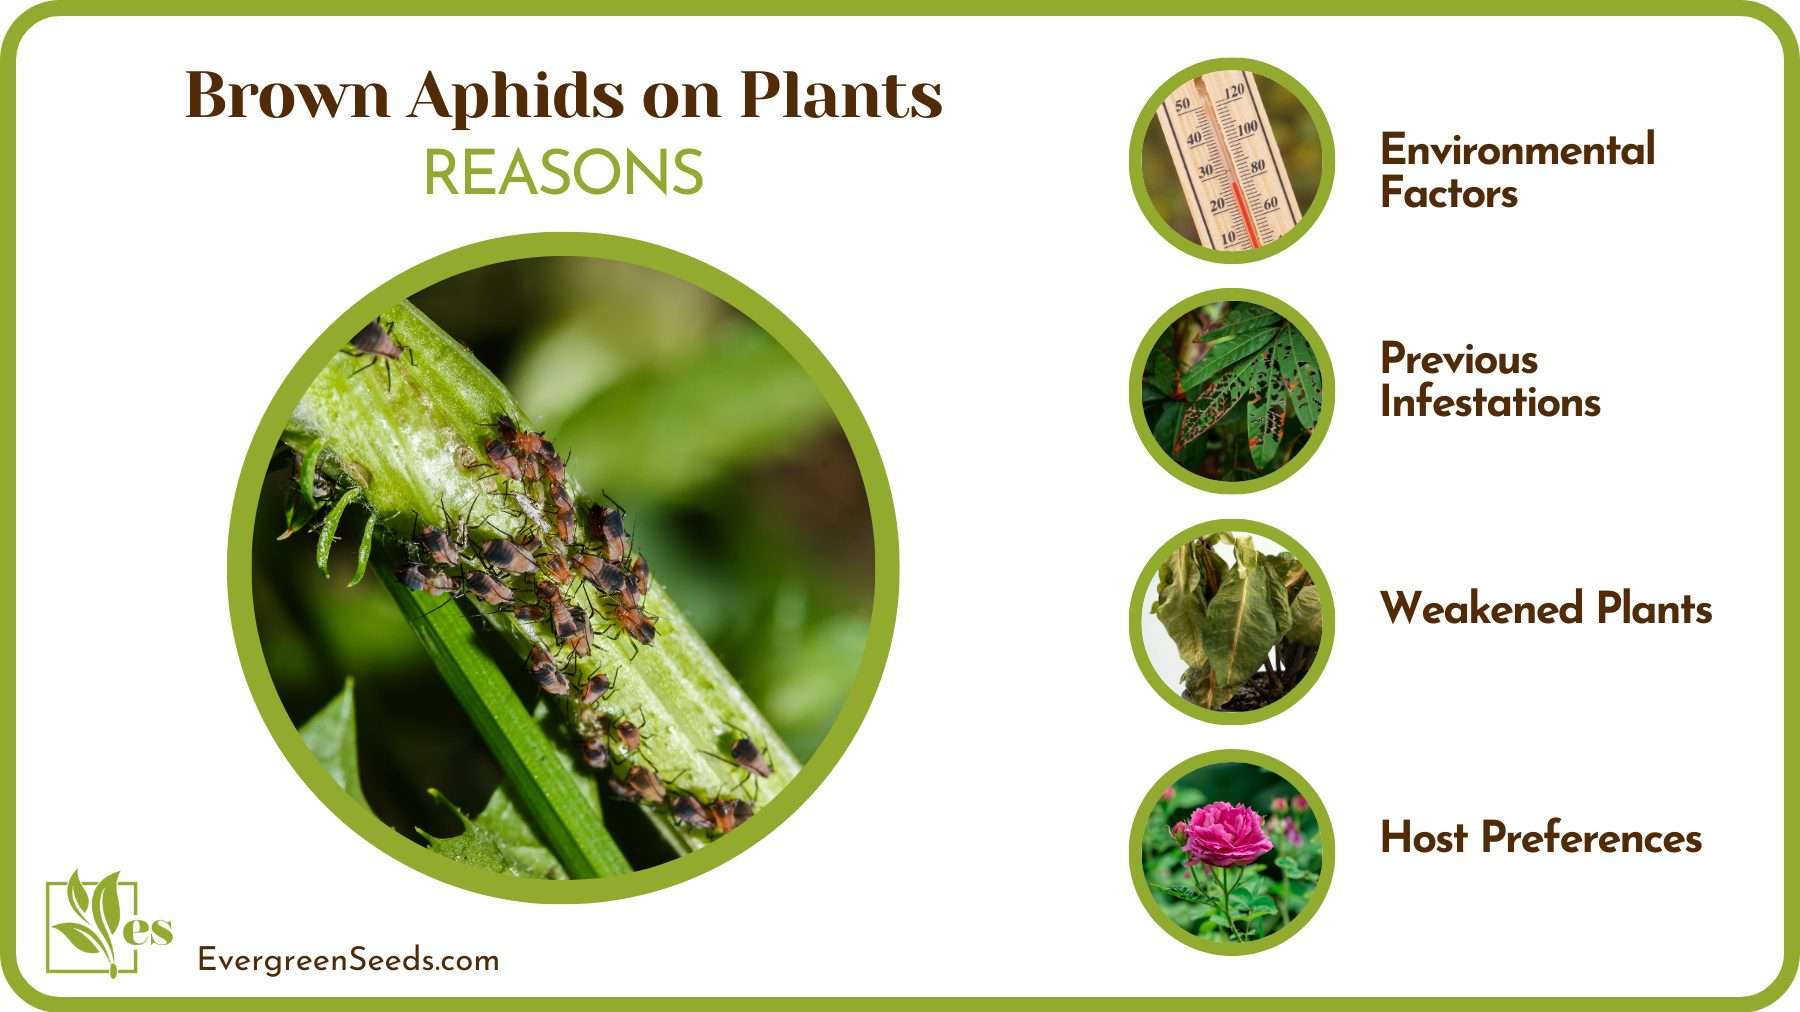 Causes of Having Brown Aphids on Plants